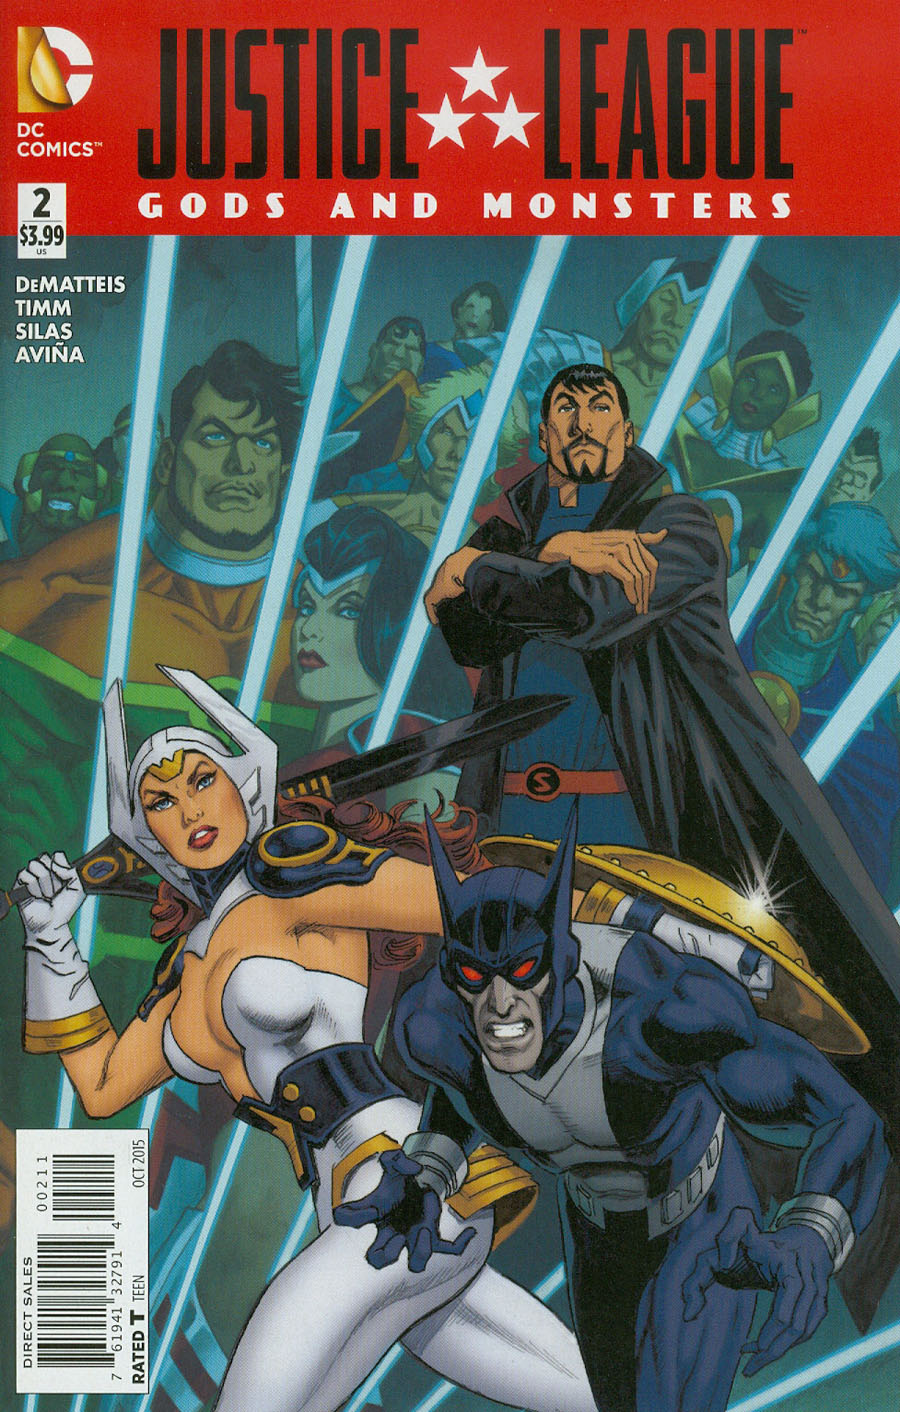 Justice League Gods And Monsters #2